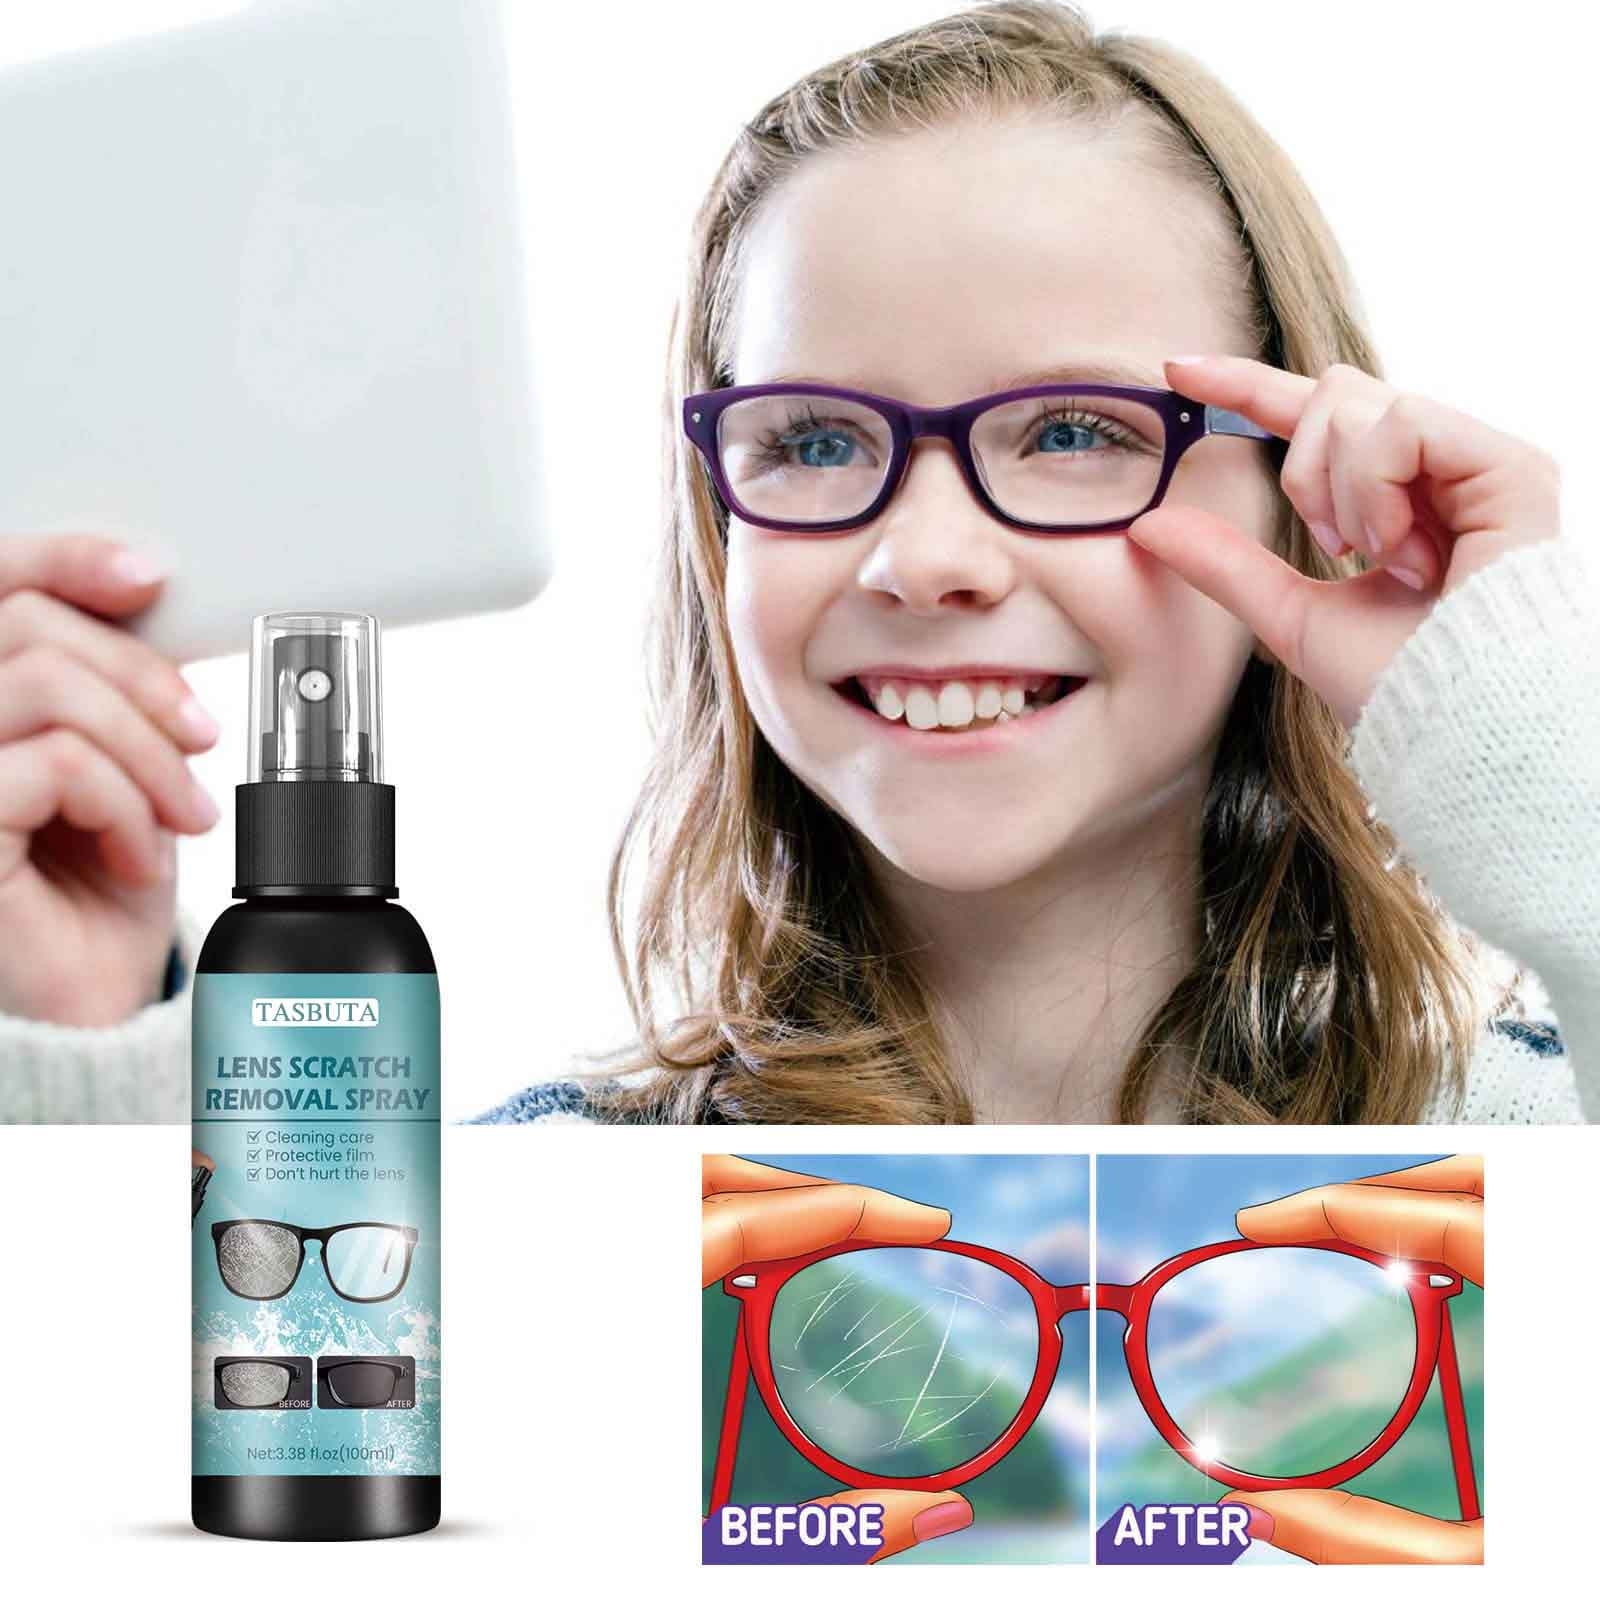 2023 New Lens Scratch Removal Spray for Glasses and Sunglasses, Scratch and  Lens Cleaner Spray ,Glass Scratch Repair Fluid, Lens Scratch